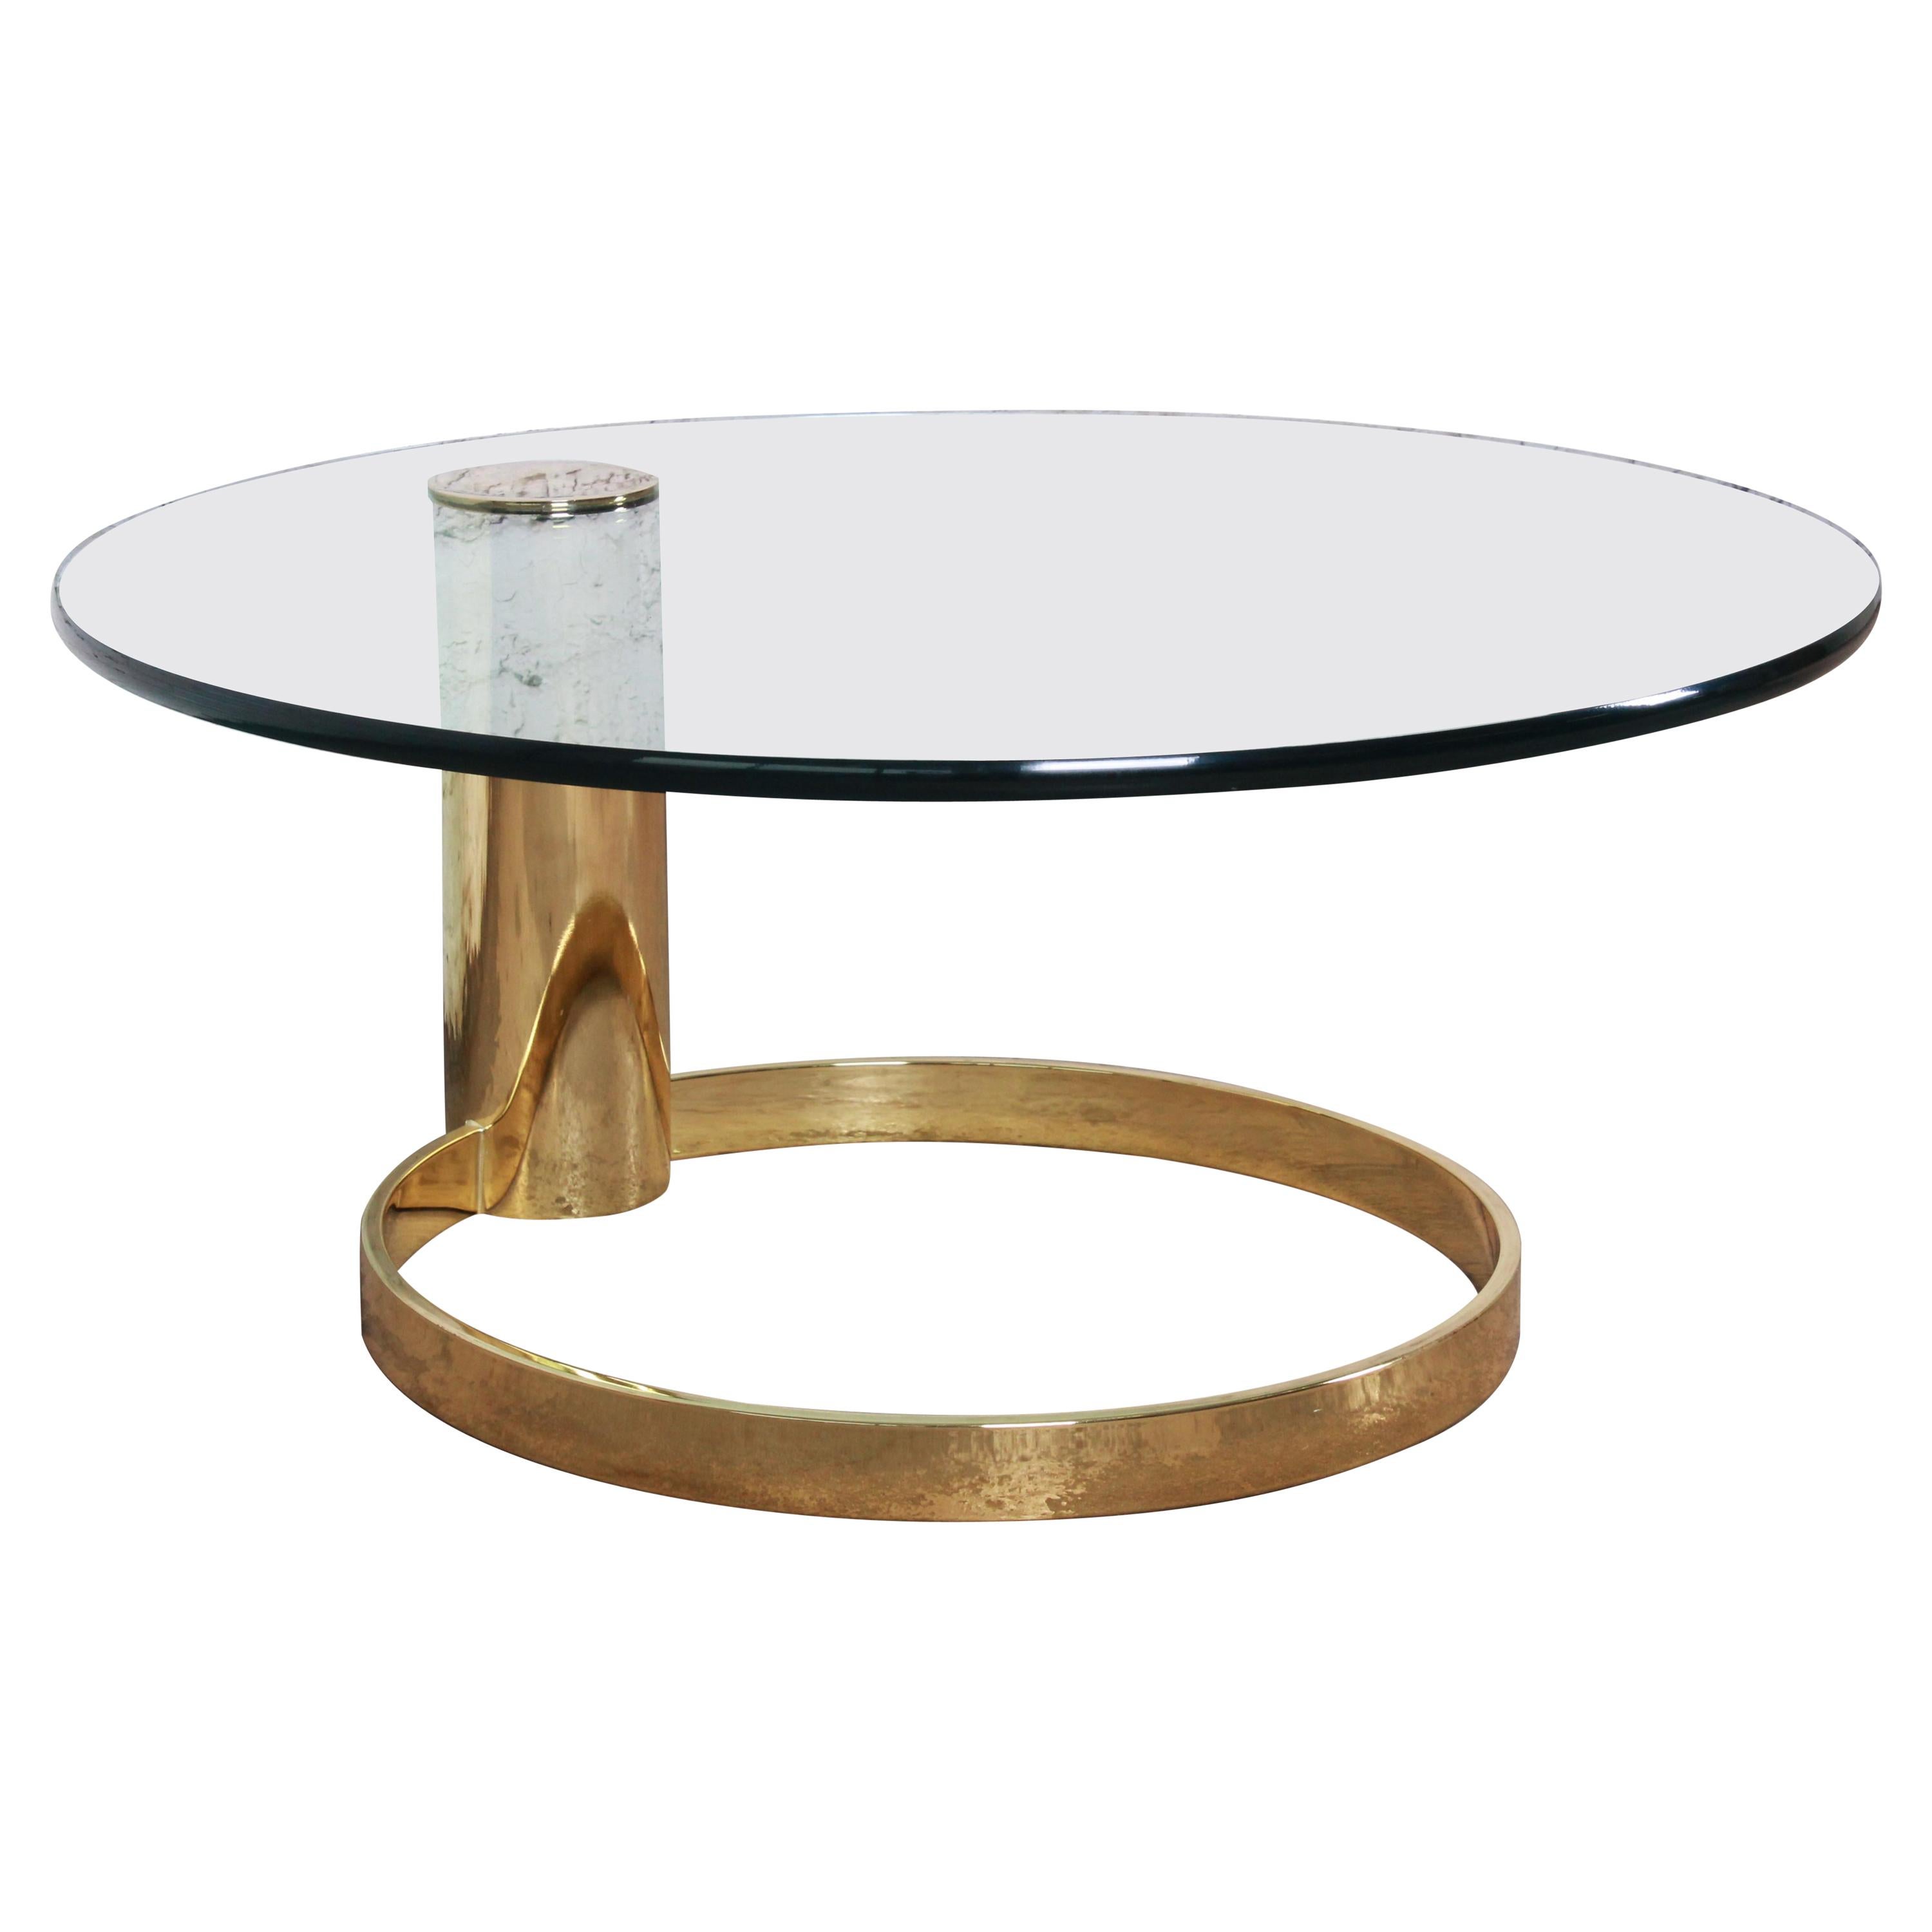 Leon Rosen for Pace Collection Cantilevered Brass and Glass Coffee Table